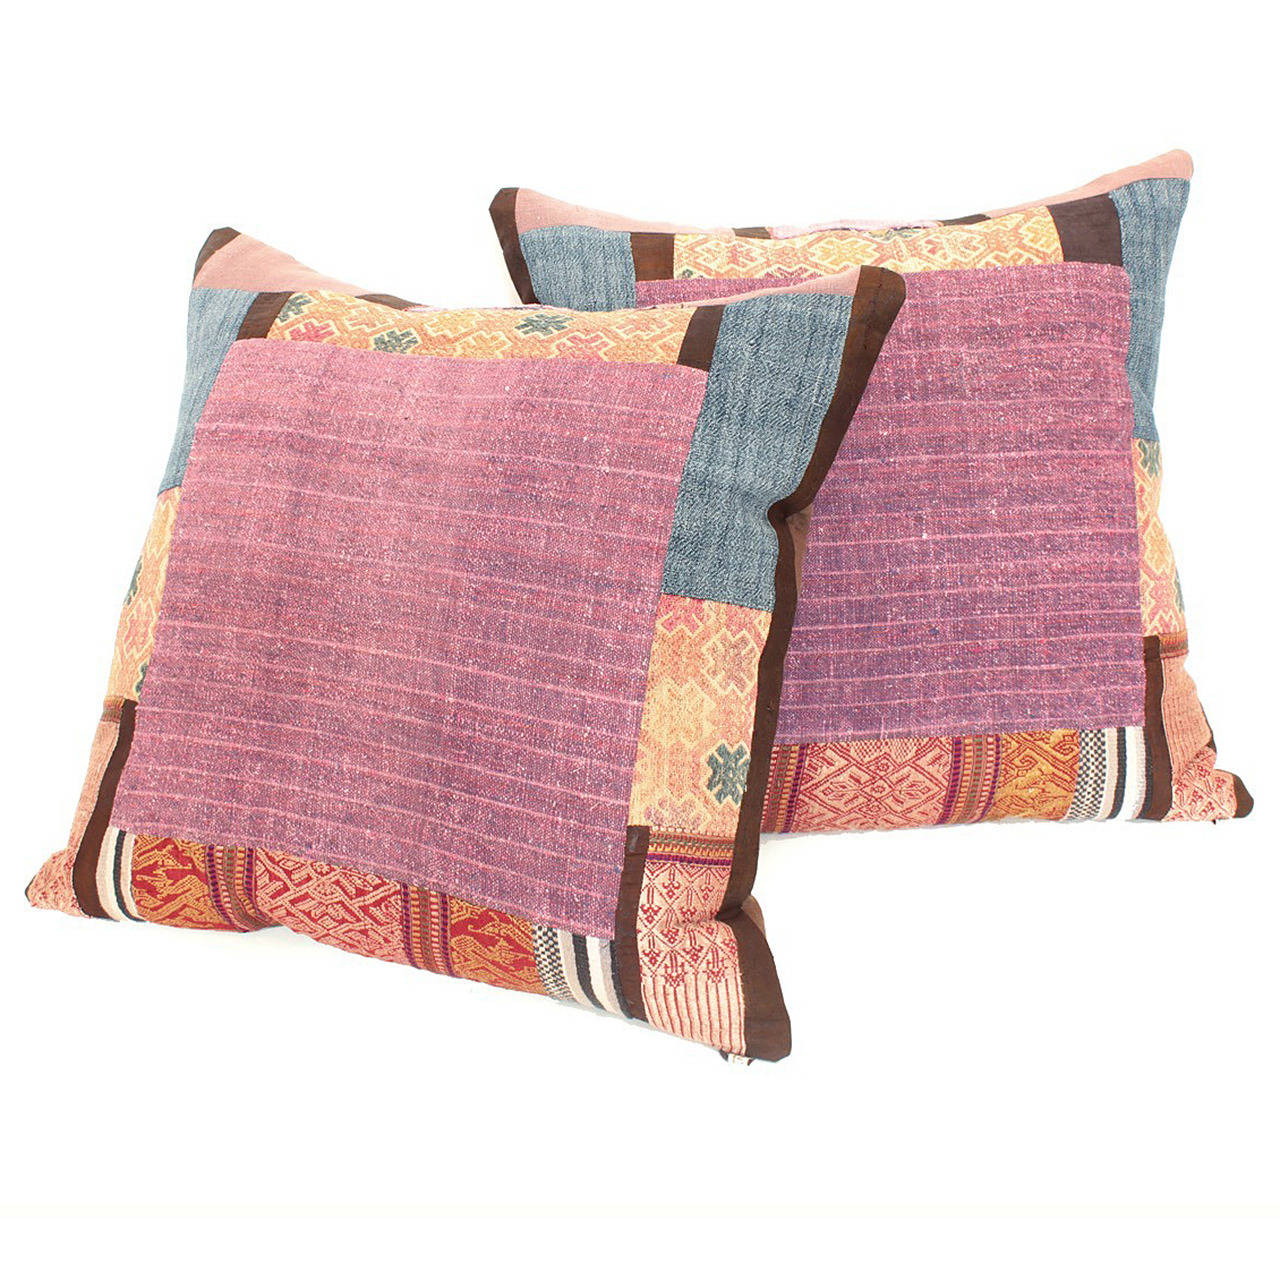 Hill Tribe Piecework Pillows For Sale